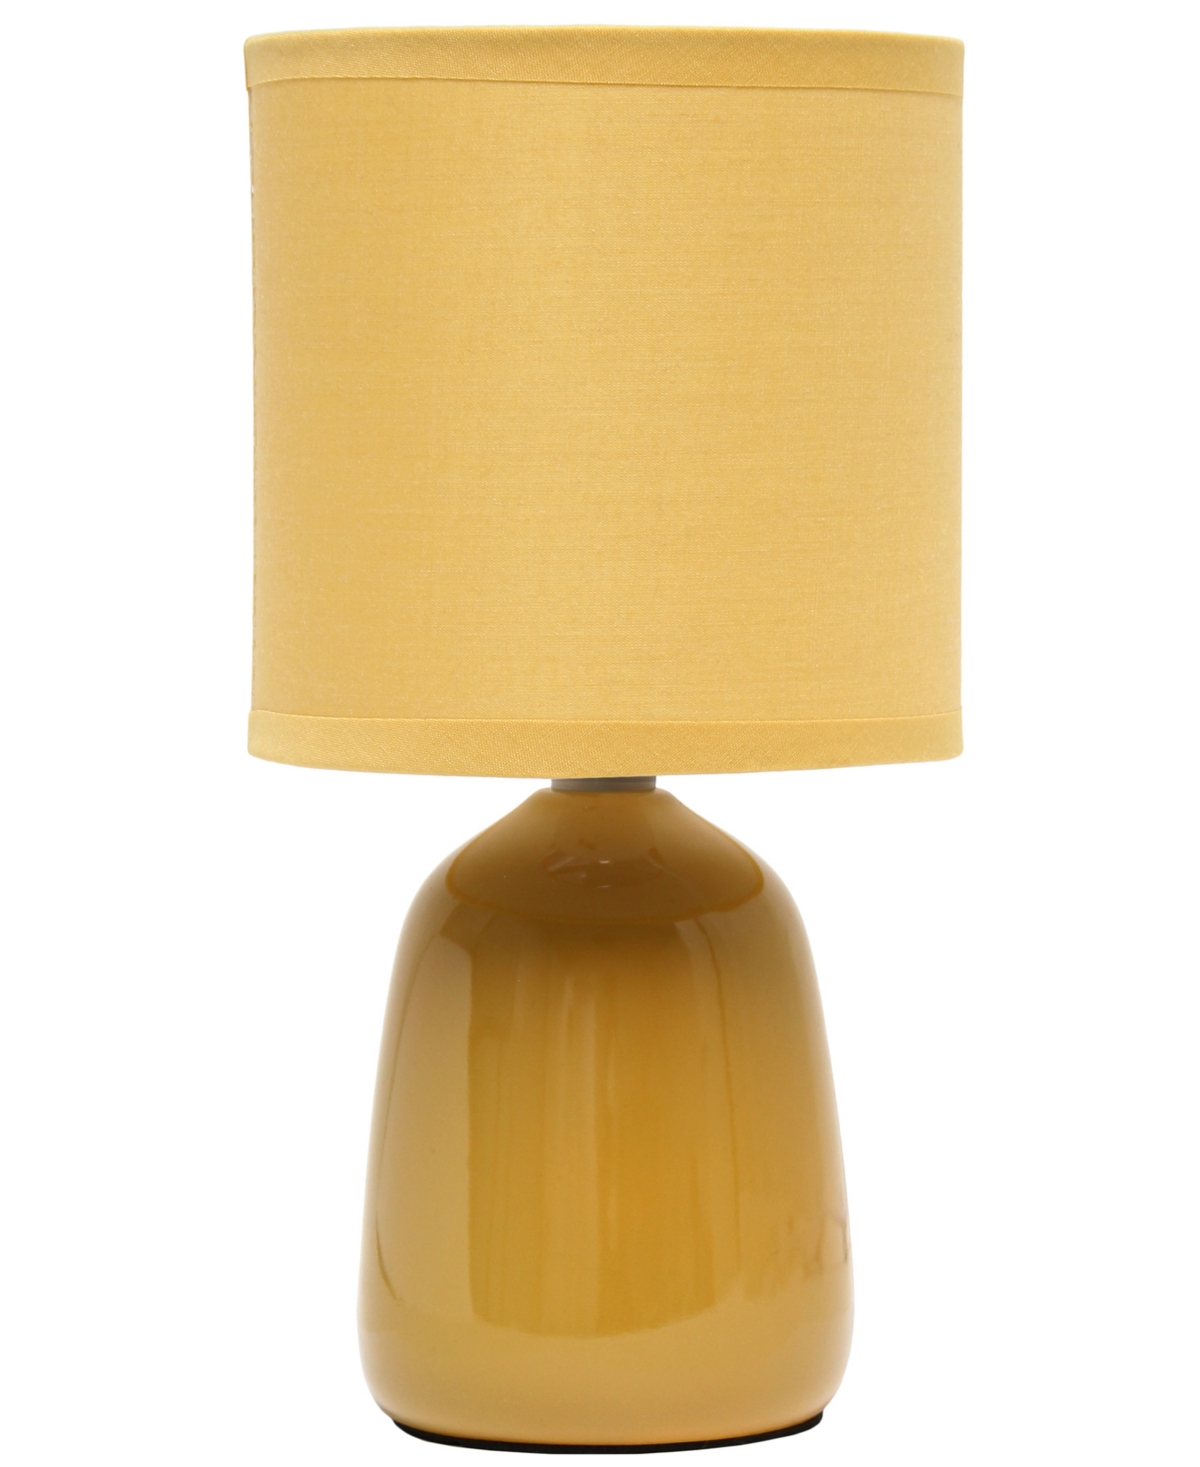 Shop Simple Designs 10.04" Tall Traditional Ceramic Thimble Base Bedside Table Desk Lamp With Matching Fabric Shade In Mustard Yellow